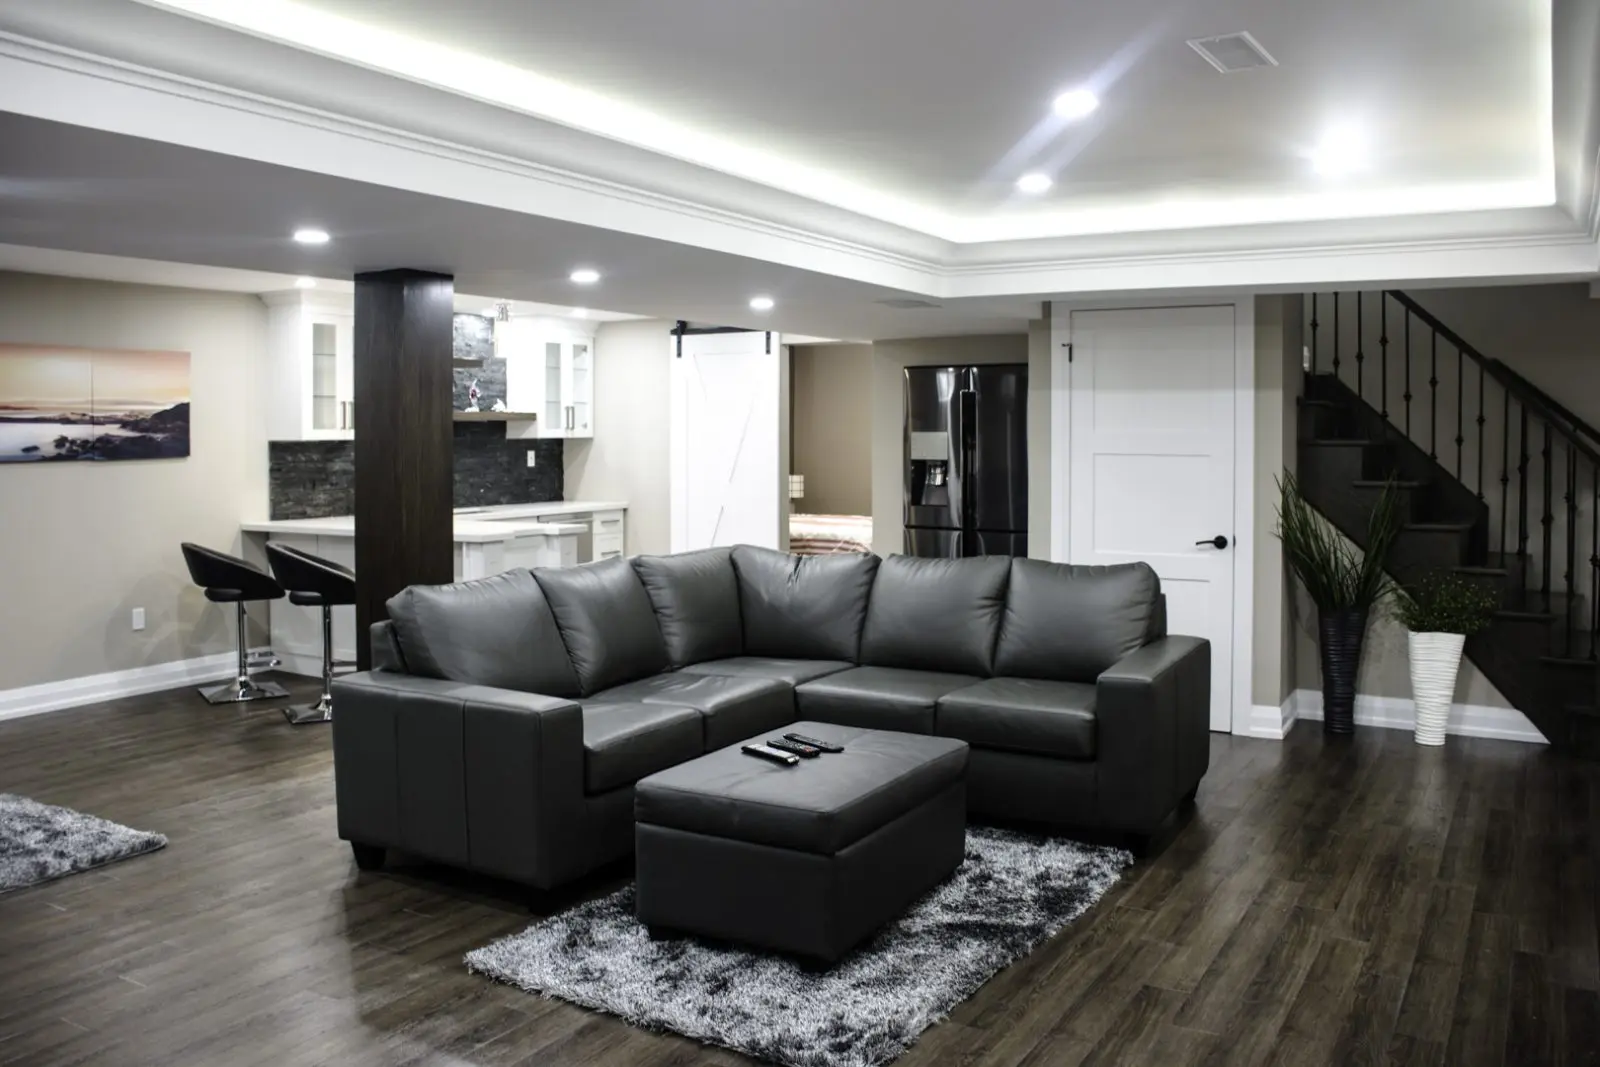 Finding the Right Contractor to Finish Your Basement in Mission Hills